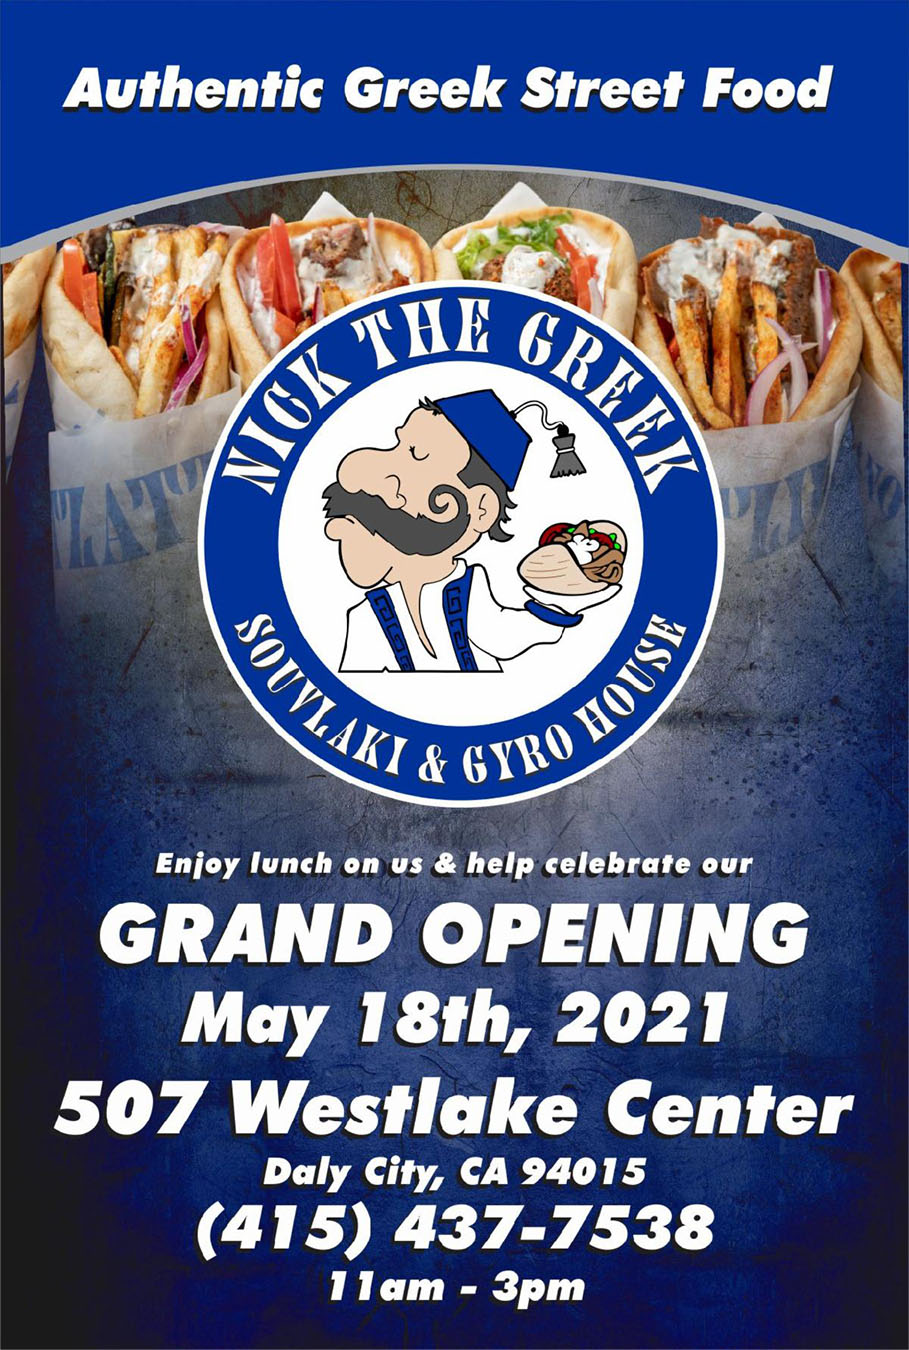 Join us May 18 to celebrate Nick the Greek Red Ribbon Cutting at Westlake Center 507 Westlake Daly City 94015 and enjoy a free lunch